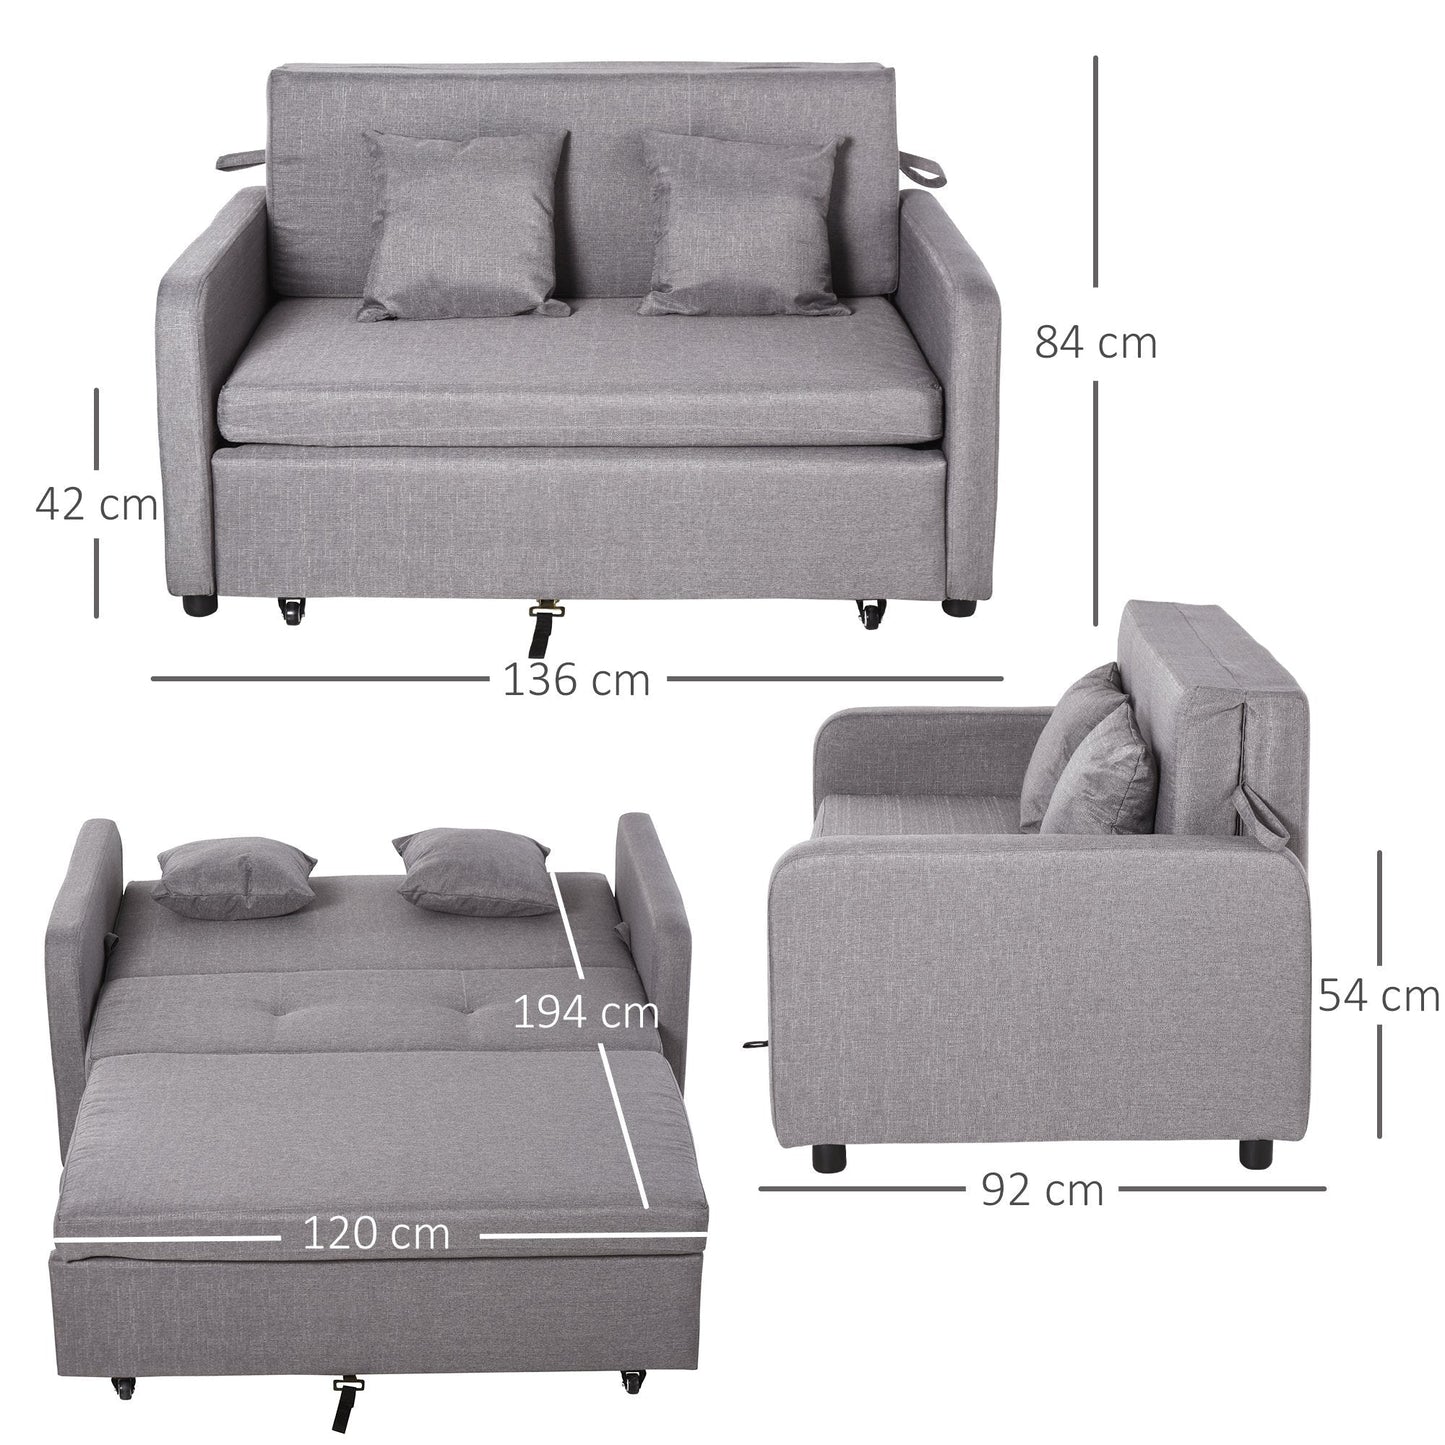 SOFA BED | 2 Seater Sofa into a Single Bed